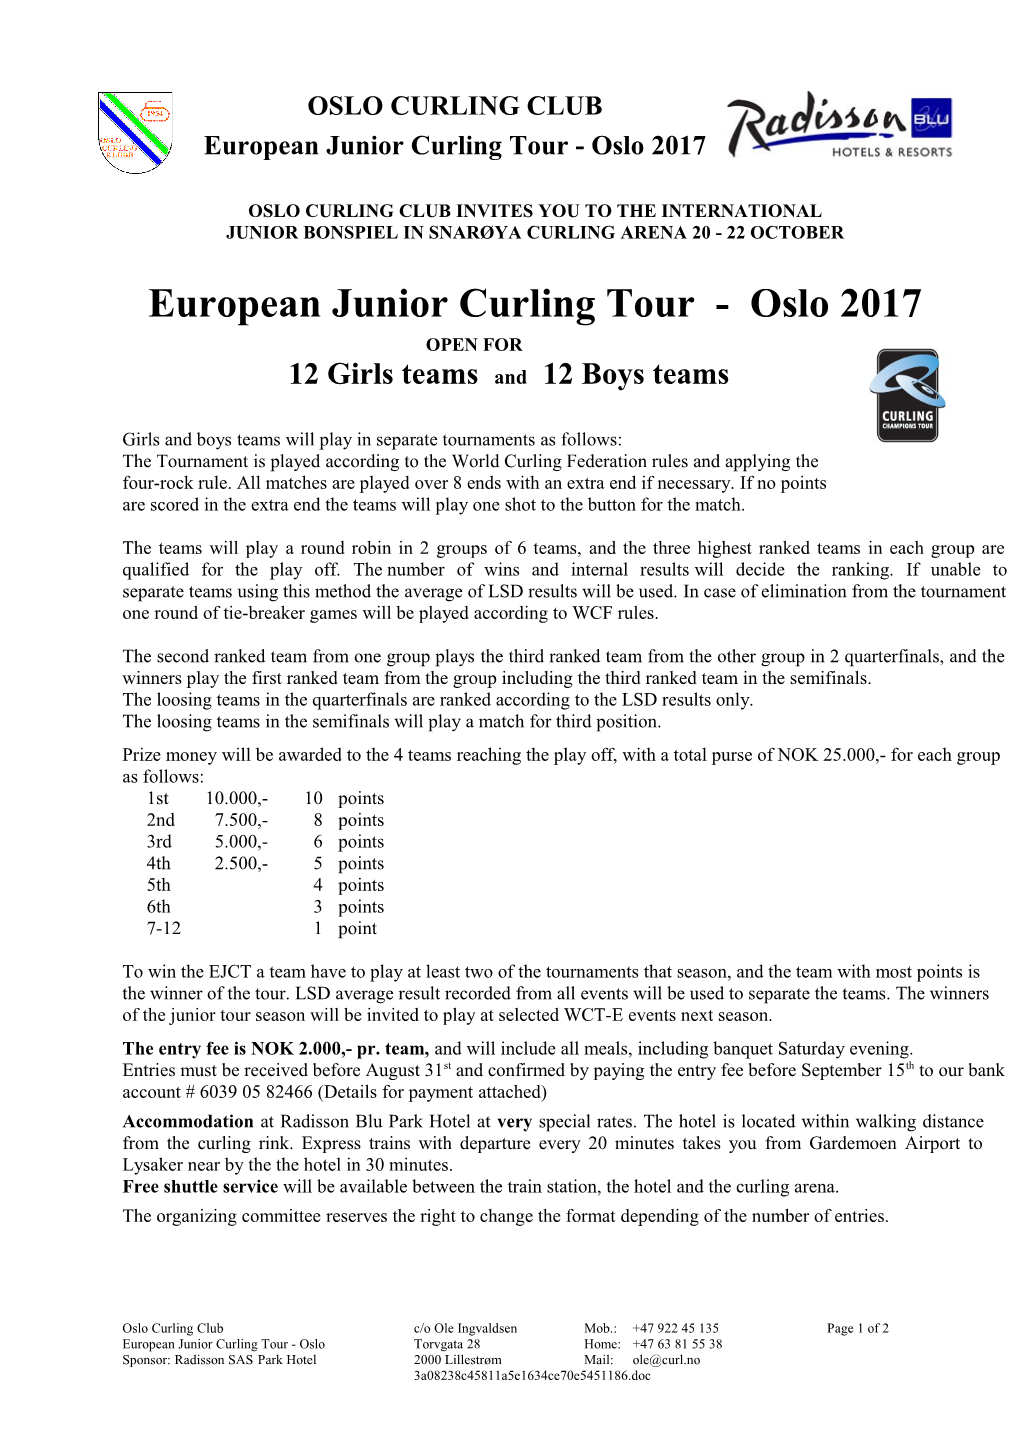 Oslo Curling Club Invites You to the International